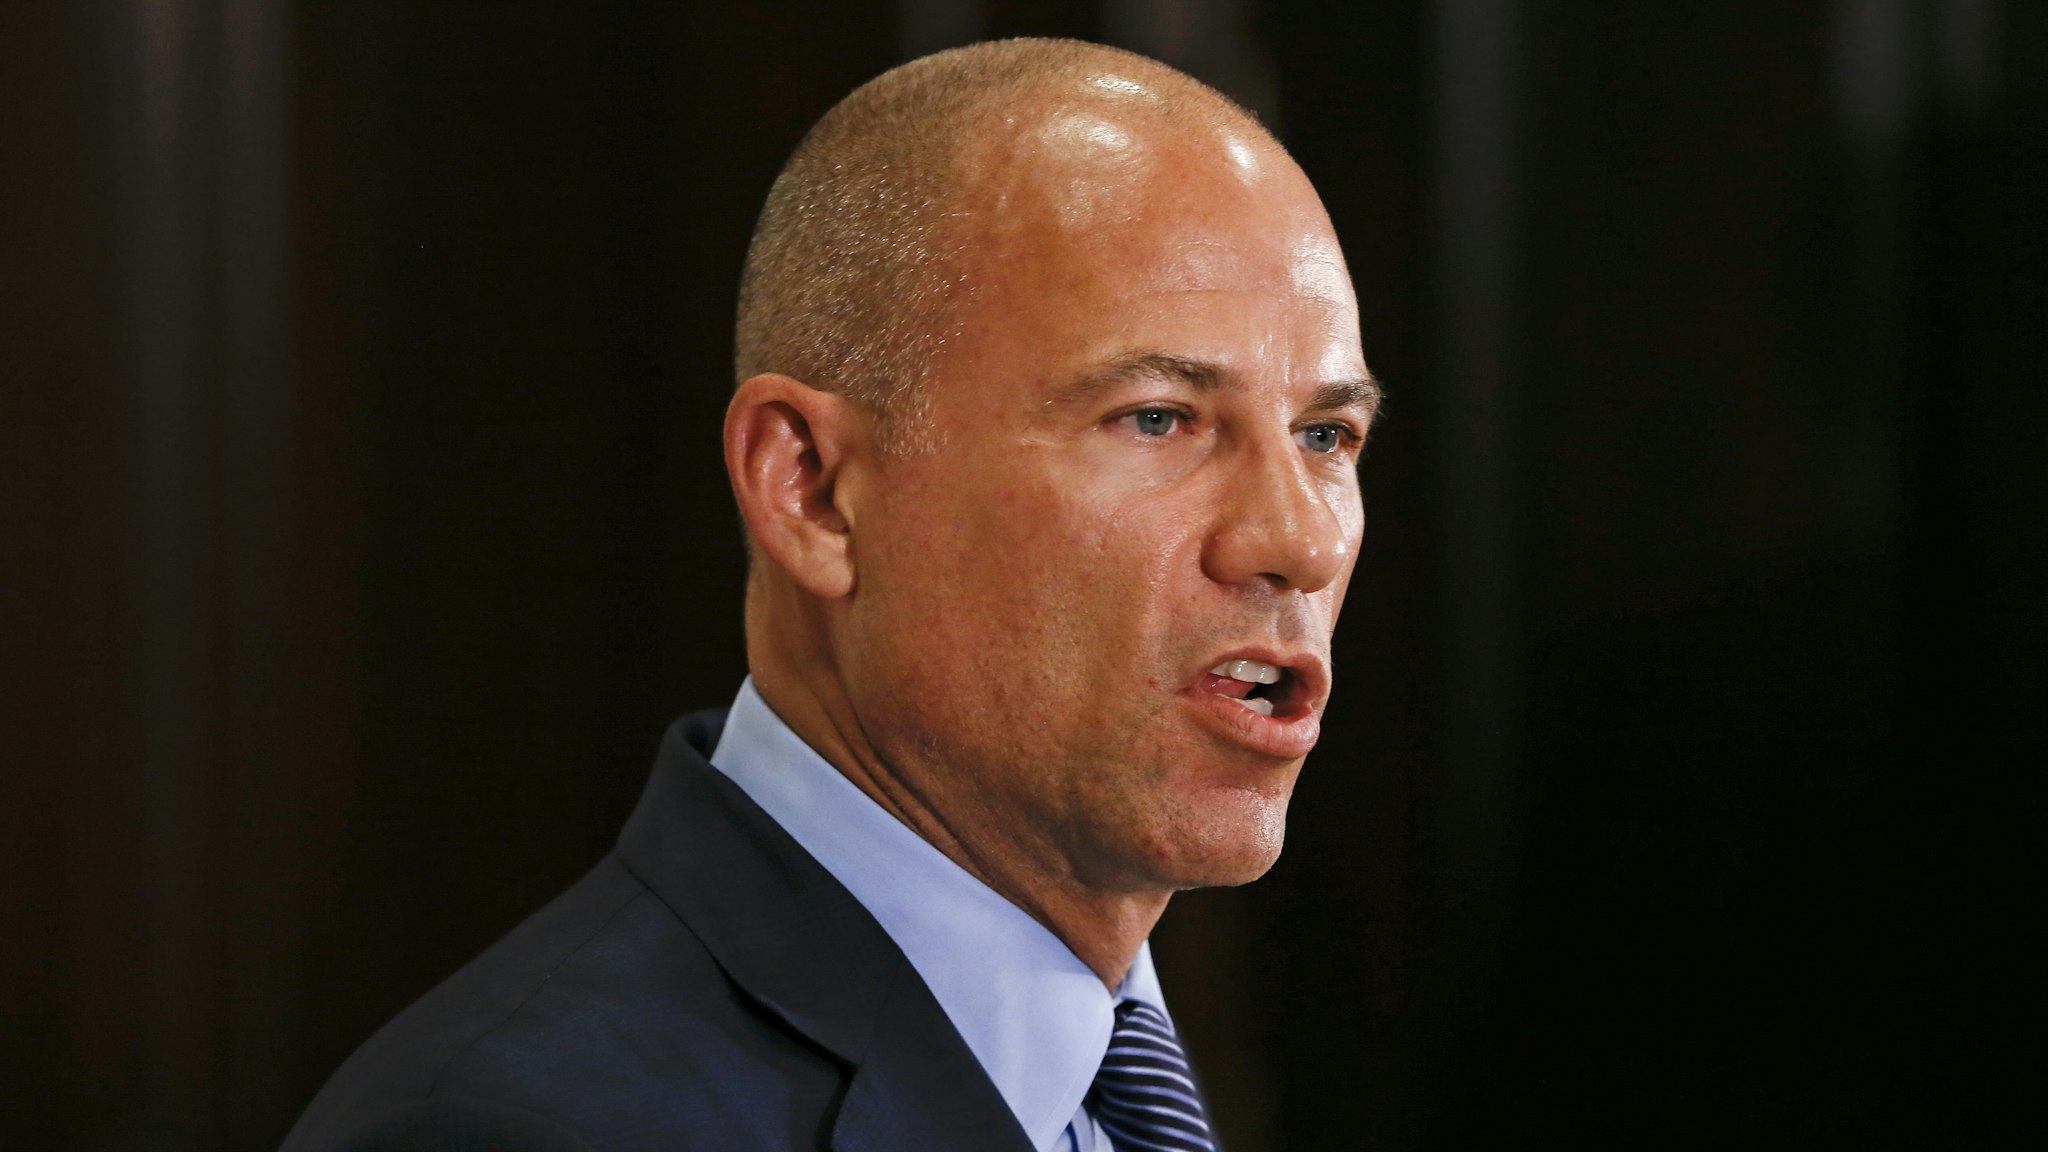 Attorney Michael Avenatti, representing some accusers of singer R. Kelly, details recent federal charges against the artist during a news conference at the Four Seasons on July 15, 2019 in Chicago, Illinois. Kelly has been charged with multiple sex crimes involving four women, three of whom were underage at the time of the alleged encounters.